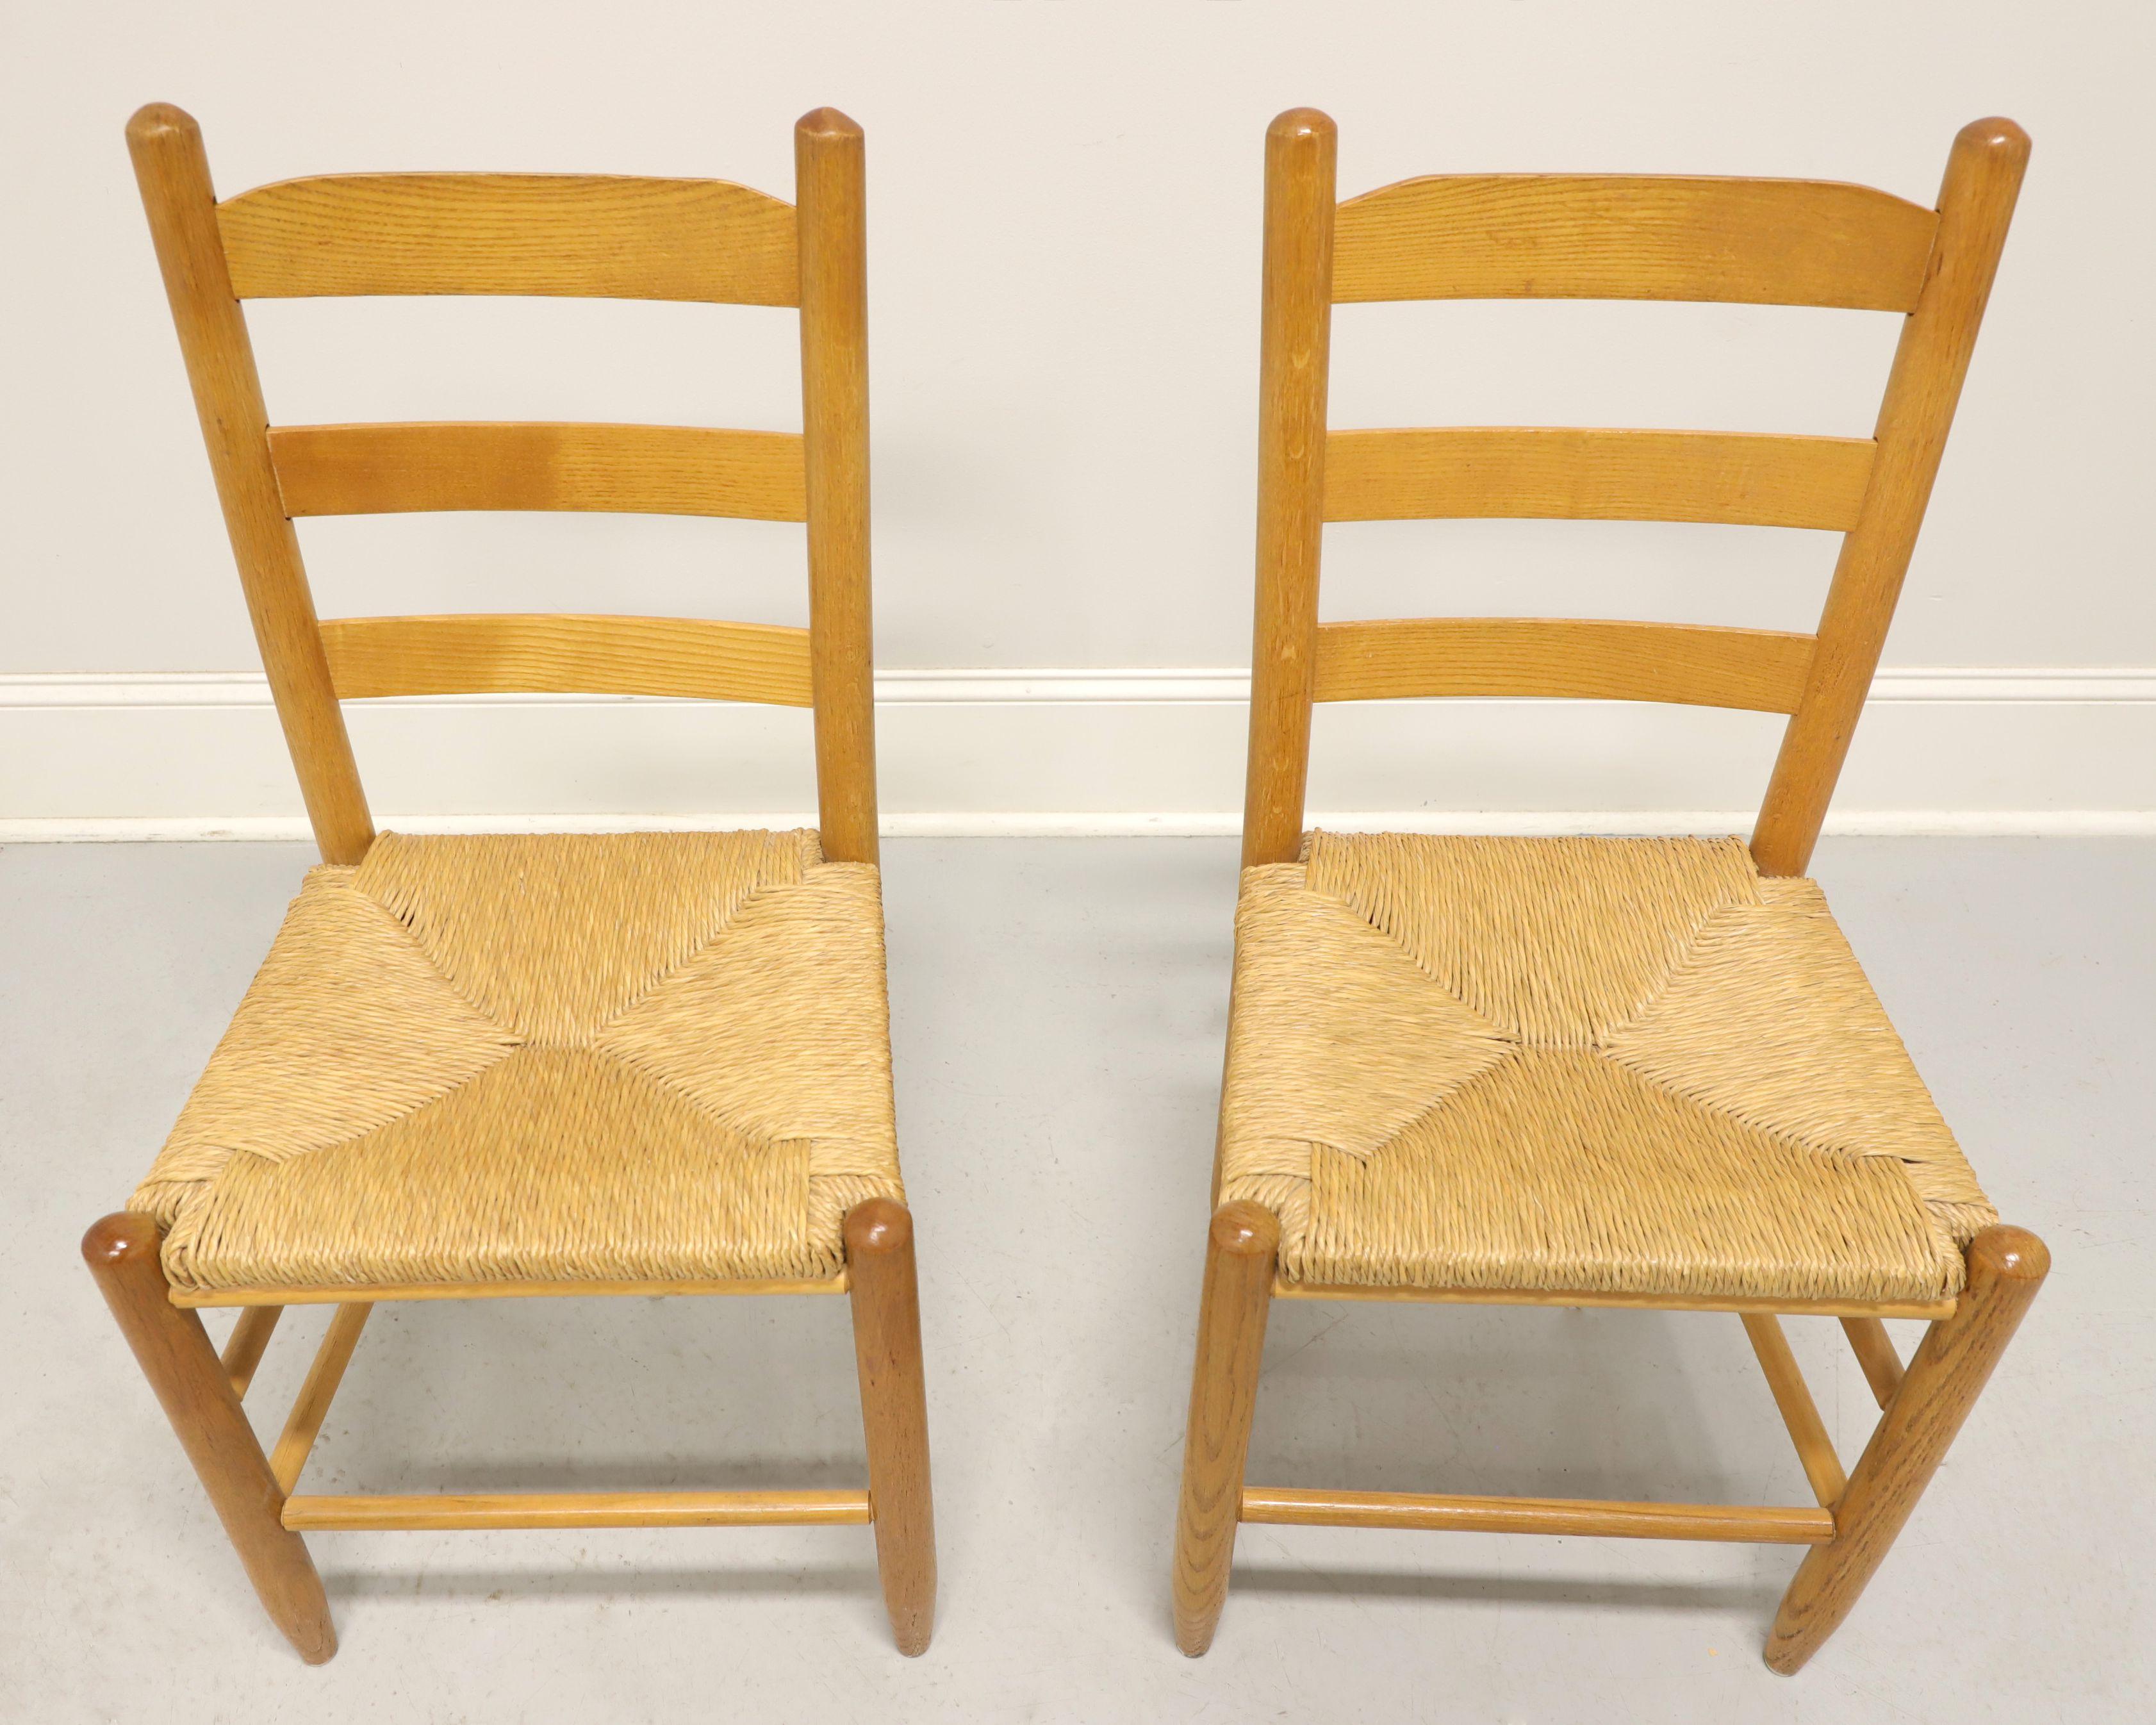 A pair of Cottage style dining side chairs, unbranded. Solid oak with ladder back design, rush seats, tapered round legs and stretchers. Made in the USA, in the mid 20th Century.

Measures: Overall: 17.5w 17d 35.5h, Seat: 16.75w 14d